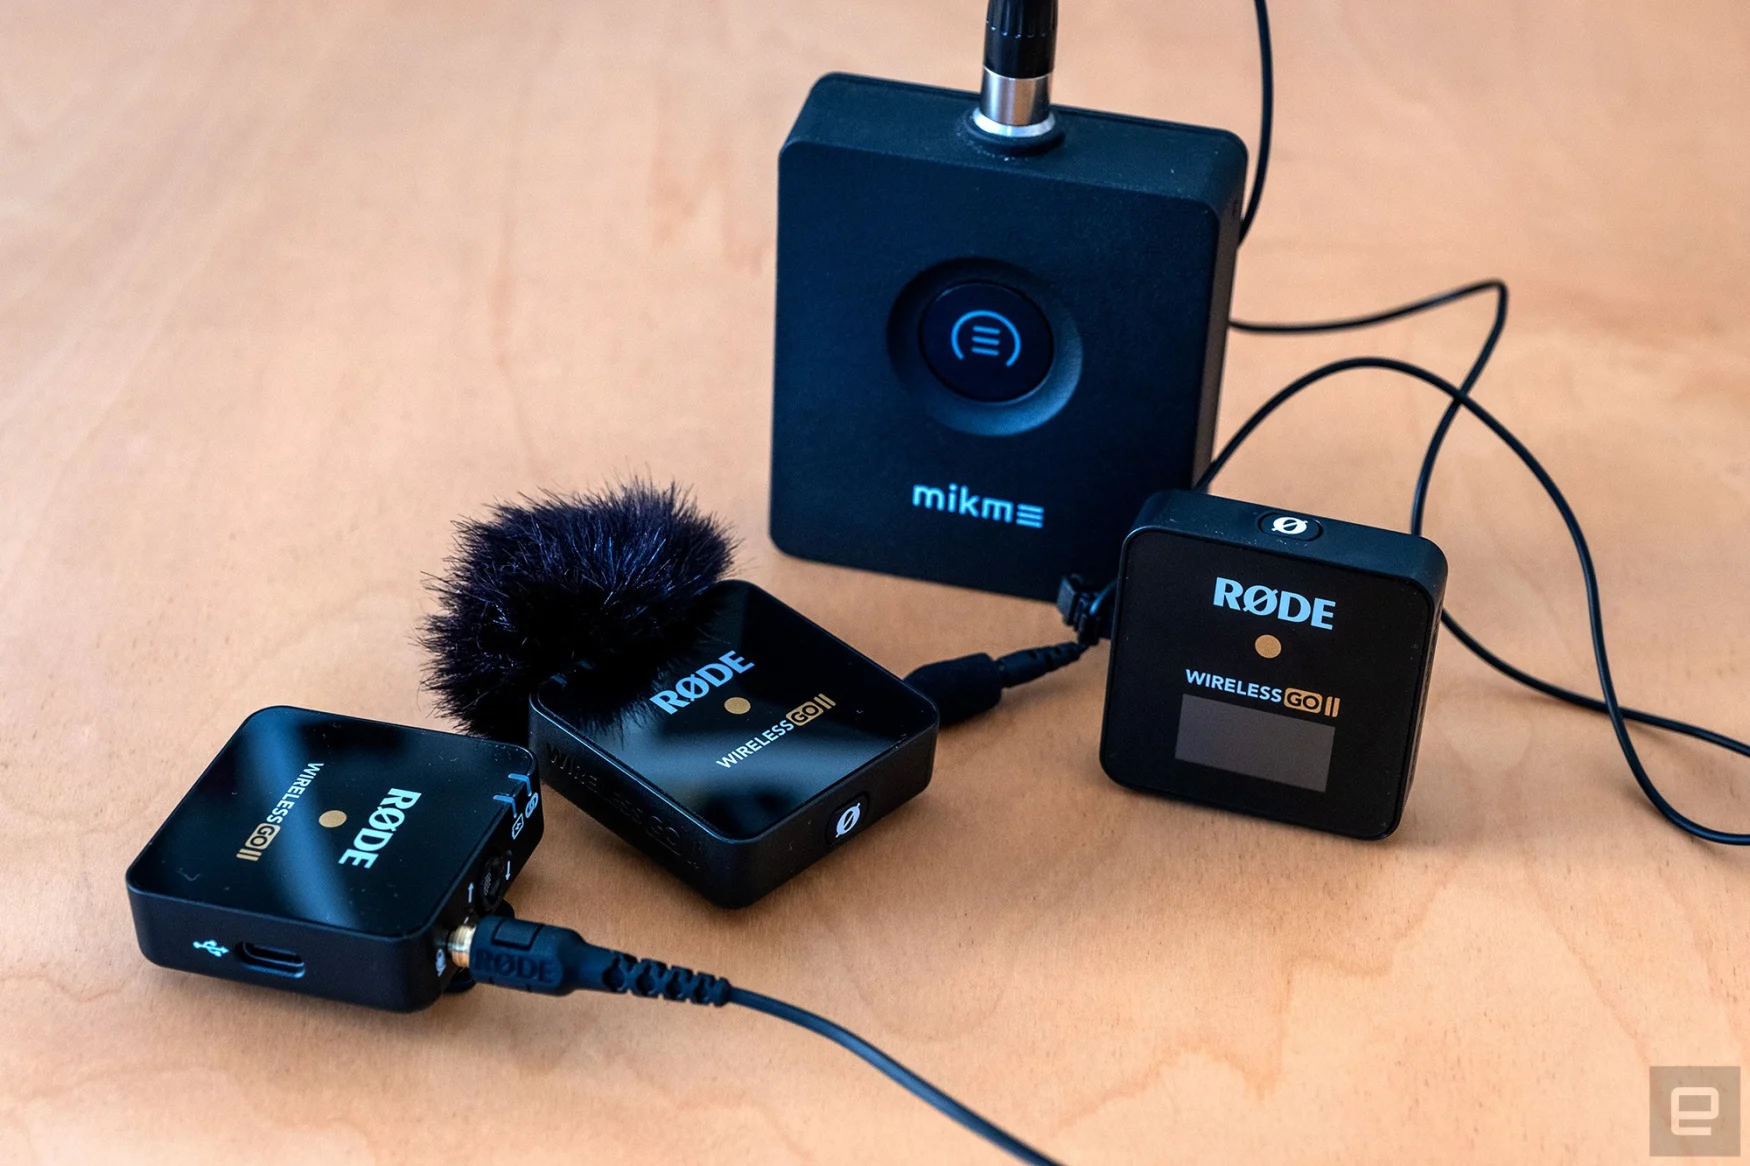 The Rode Wireless Go II and Mikme Pocket wireless microphone systems.